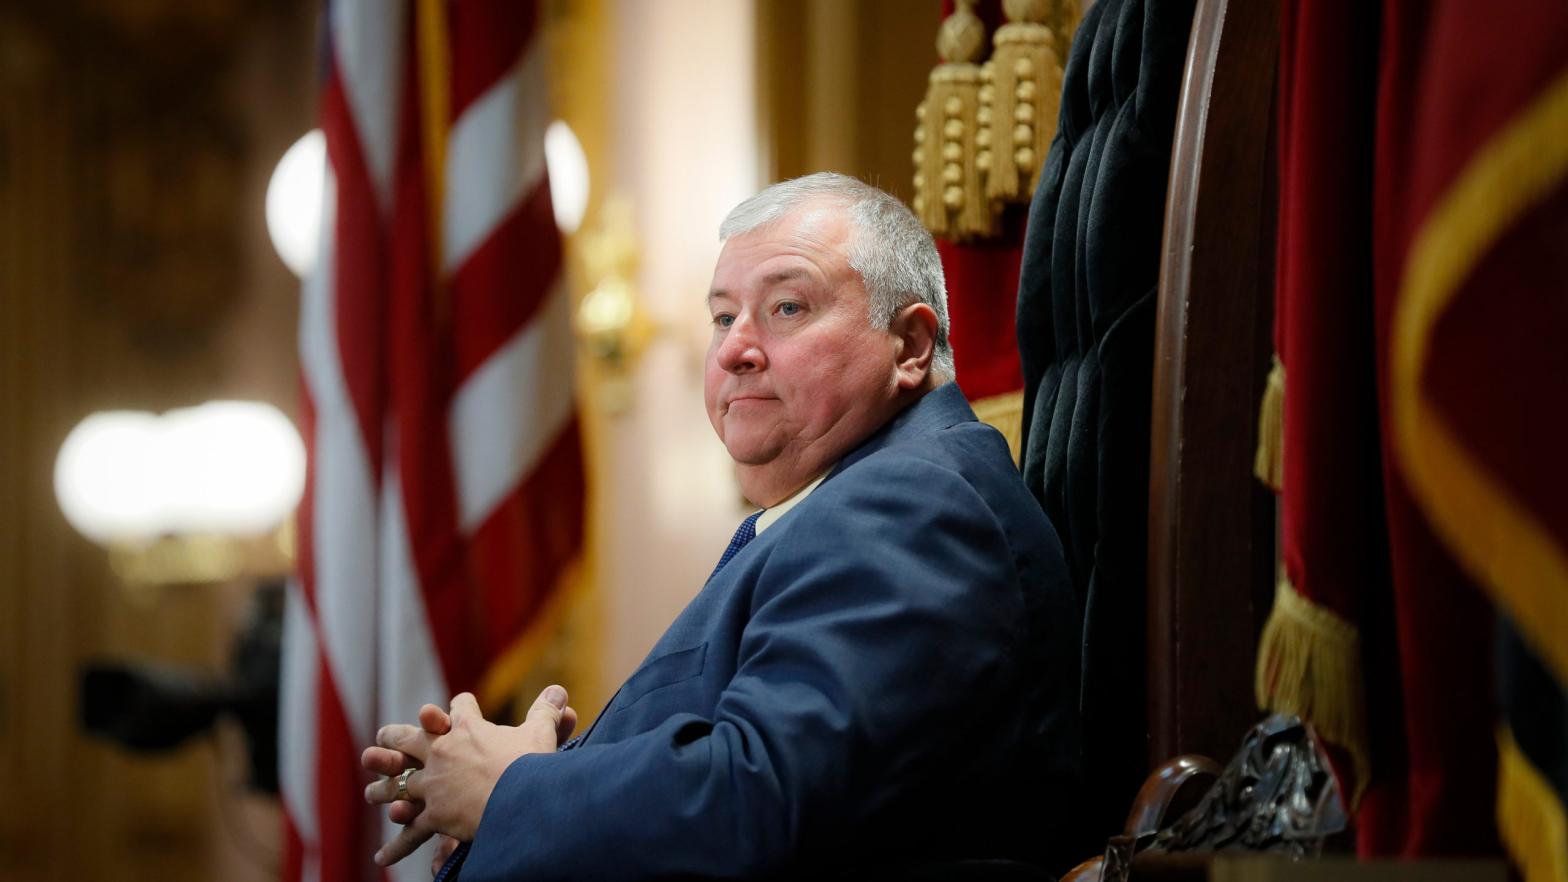 Former Ohio State Rep. Larry Householder was arrested along with four of his associates in July on federal corruption charges. (Photo: John Minchillo, AP)